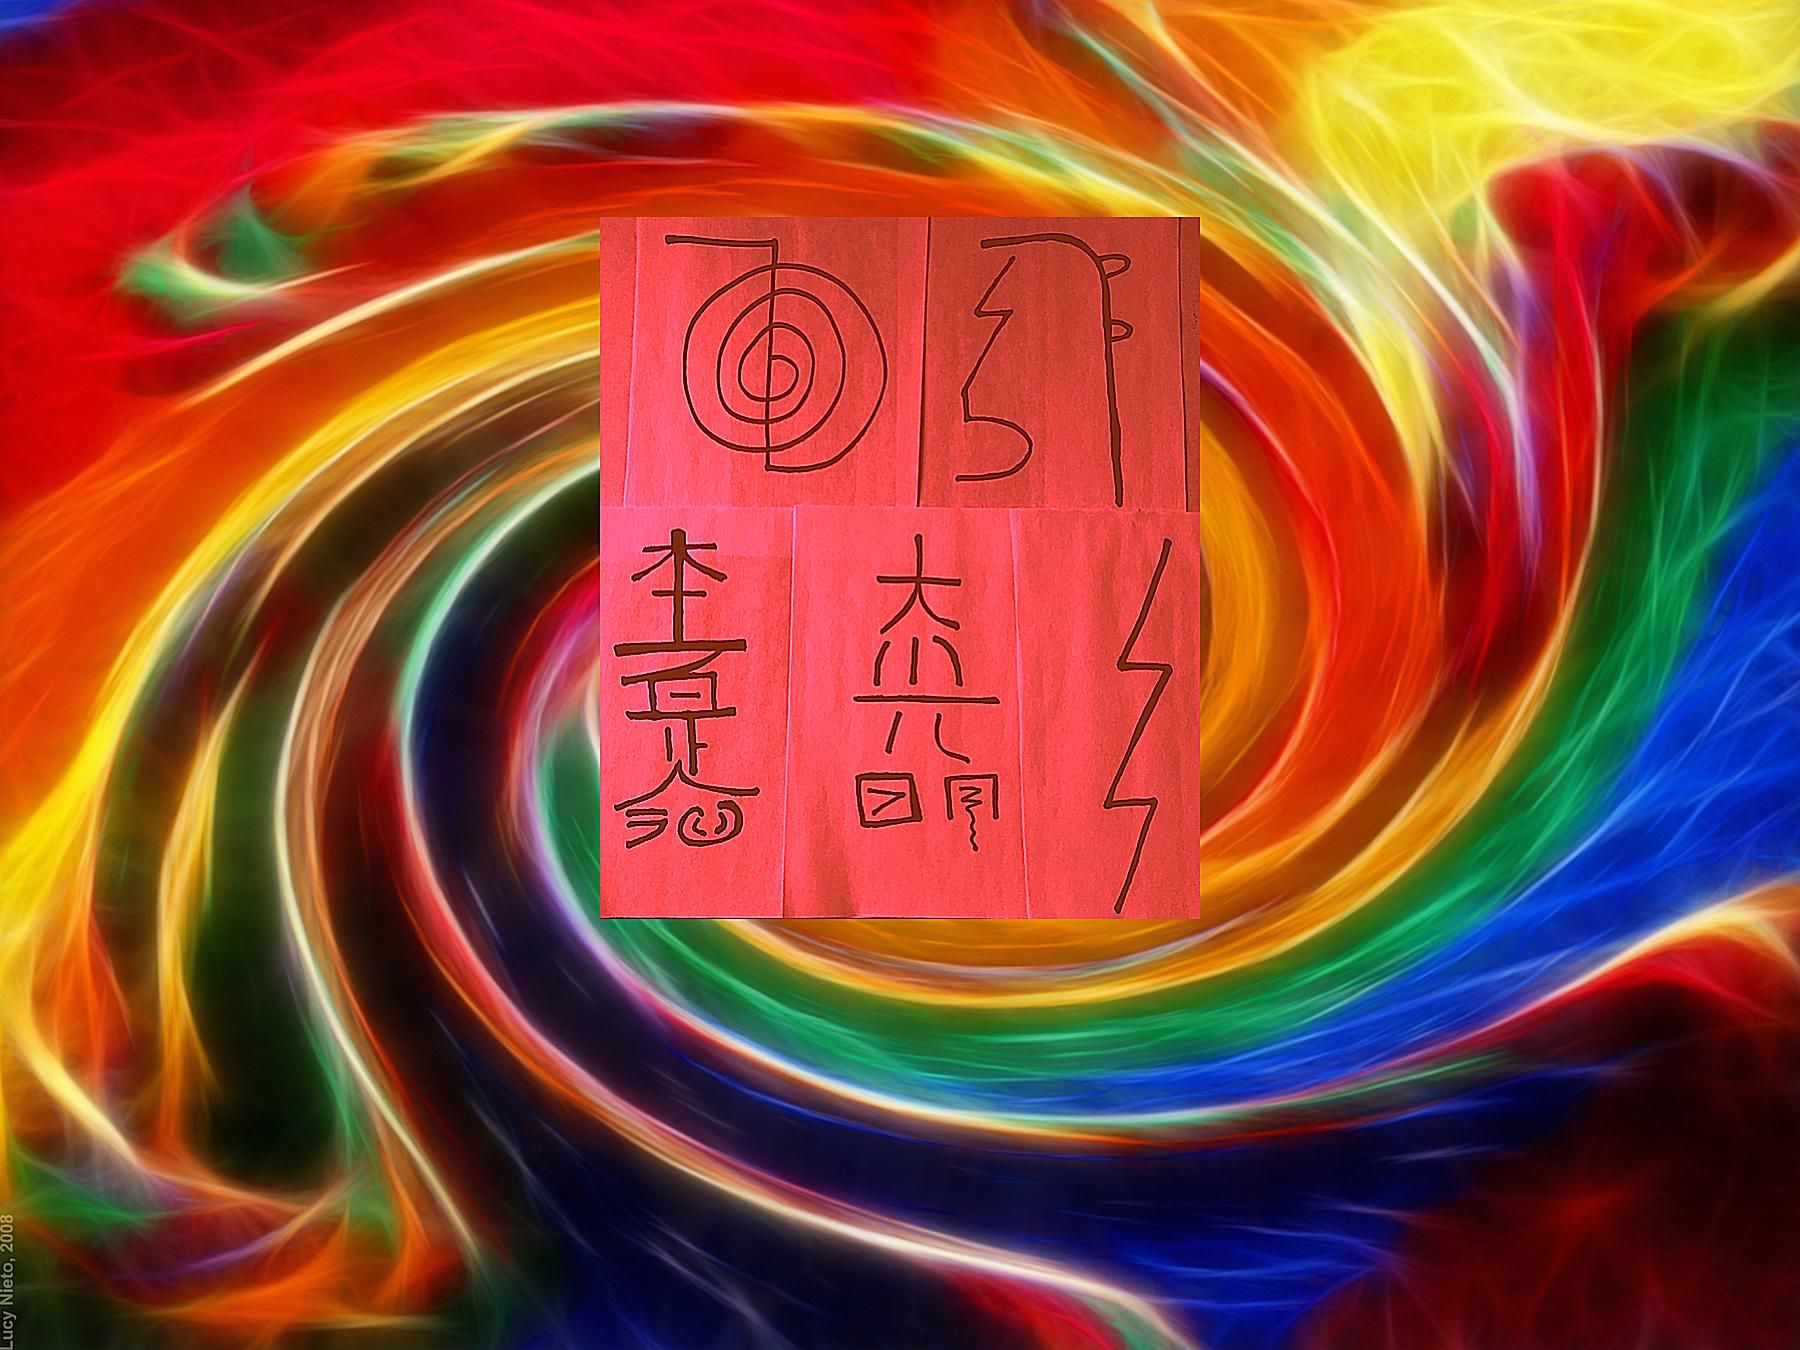 5 Traditional Usui Reiki Symbols and Their Meanings